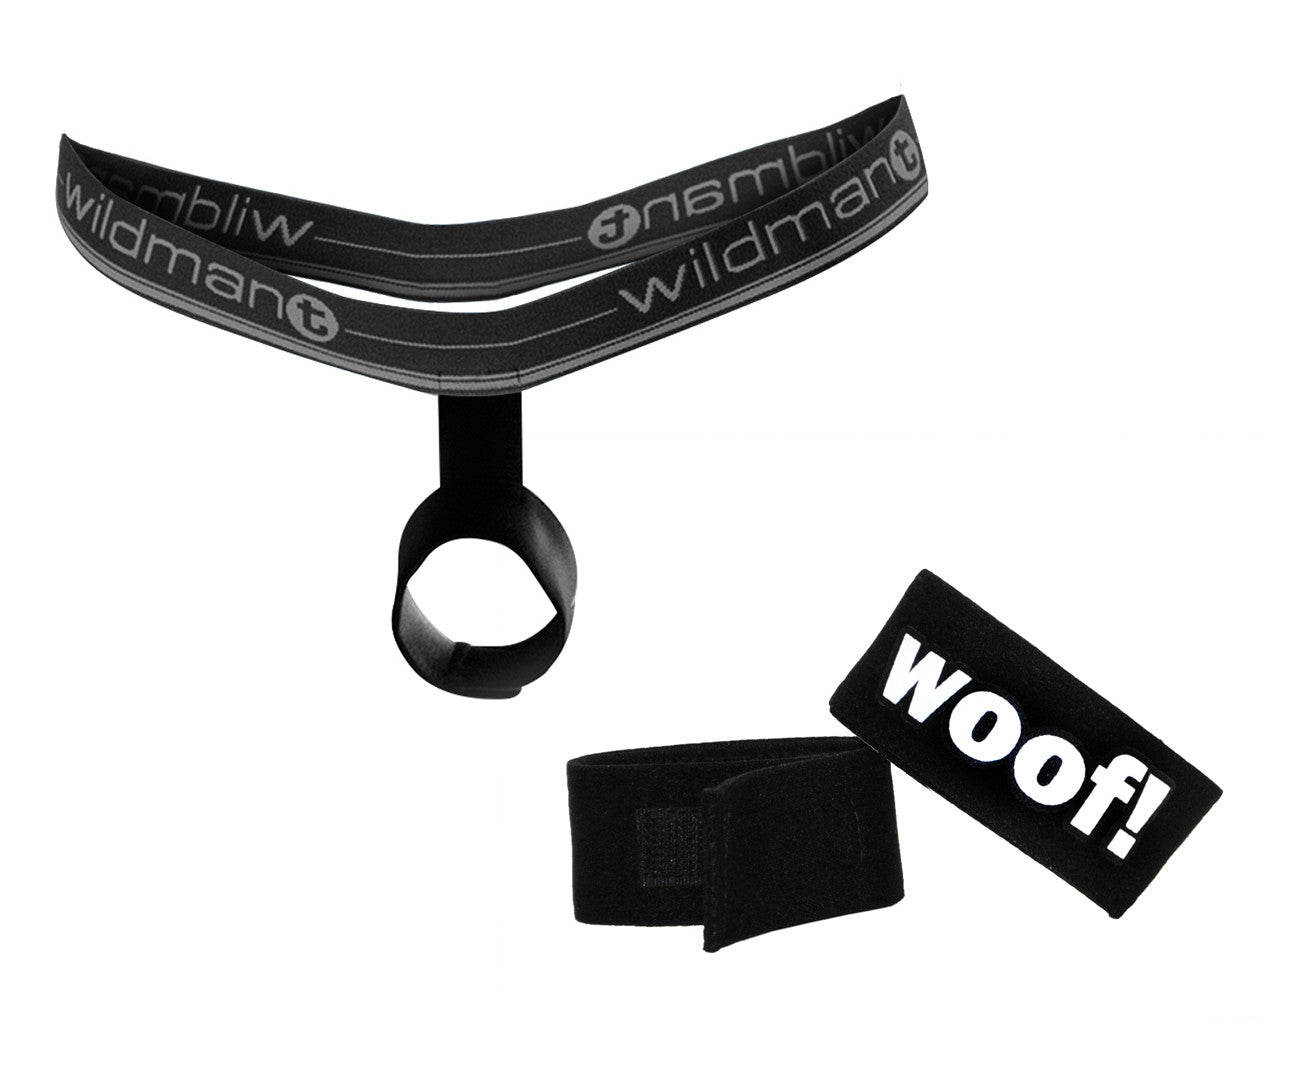 Bundle - 2 items: WildmanT Ball Lifter Protruder And "Woof" Ring - DealByEthan.gay